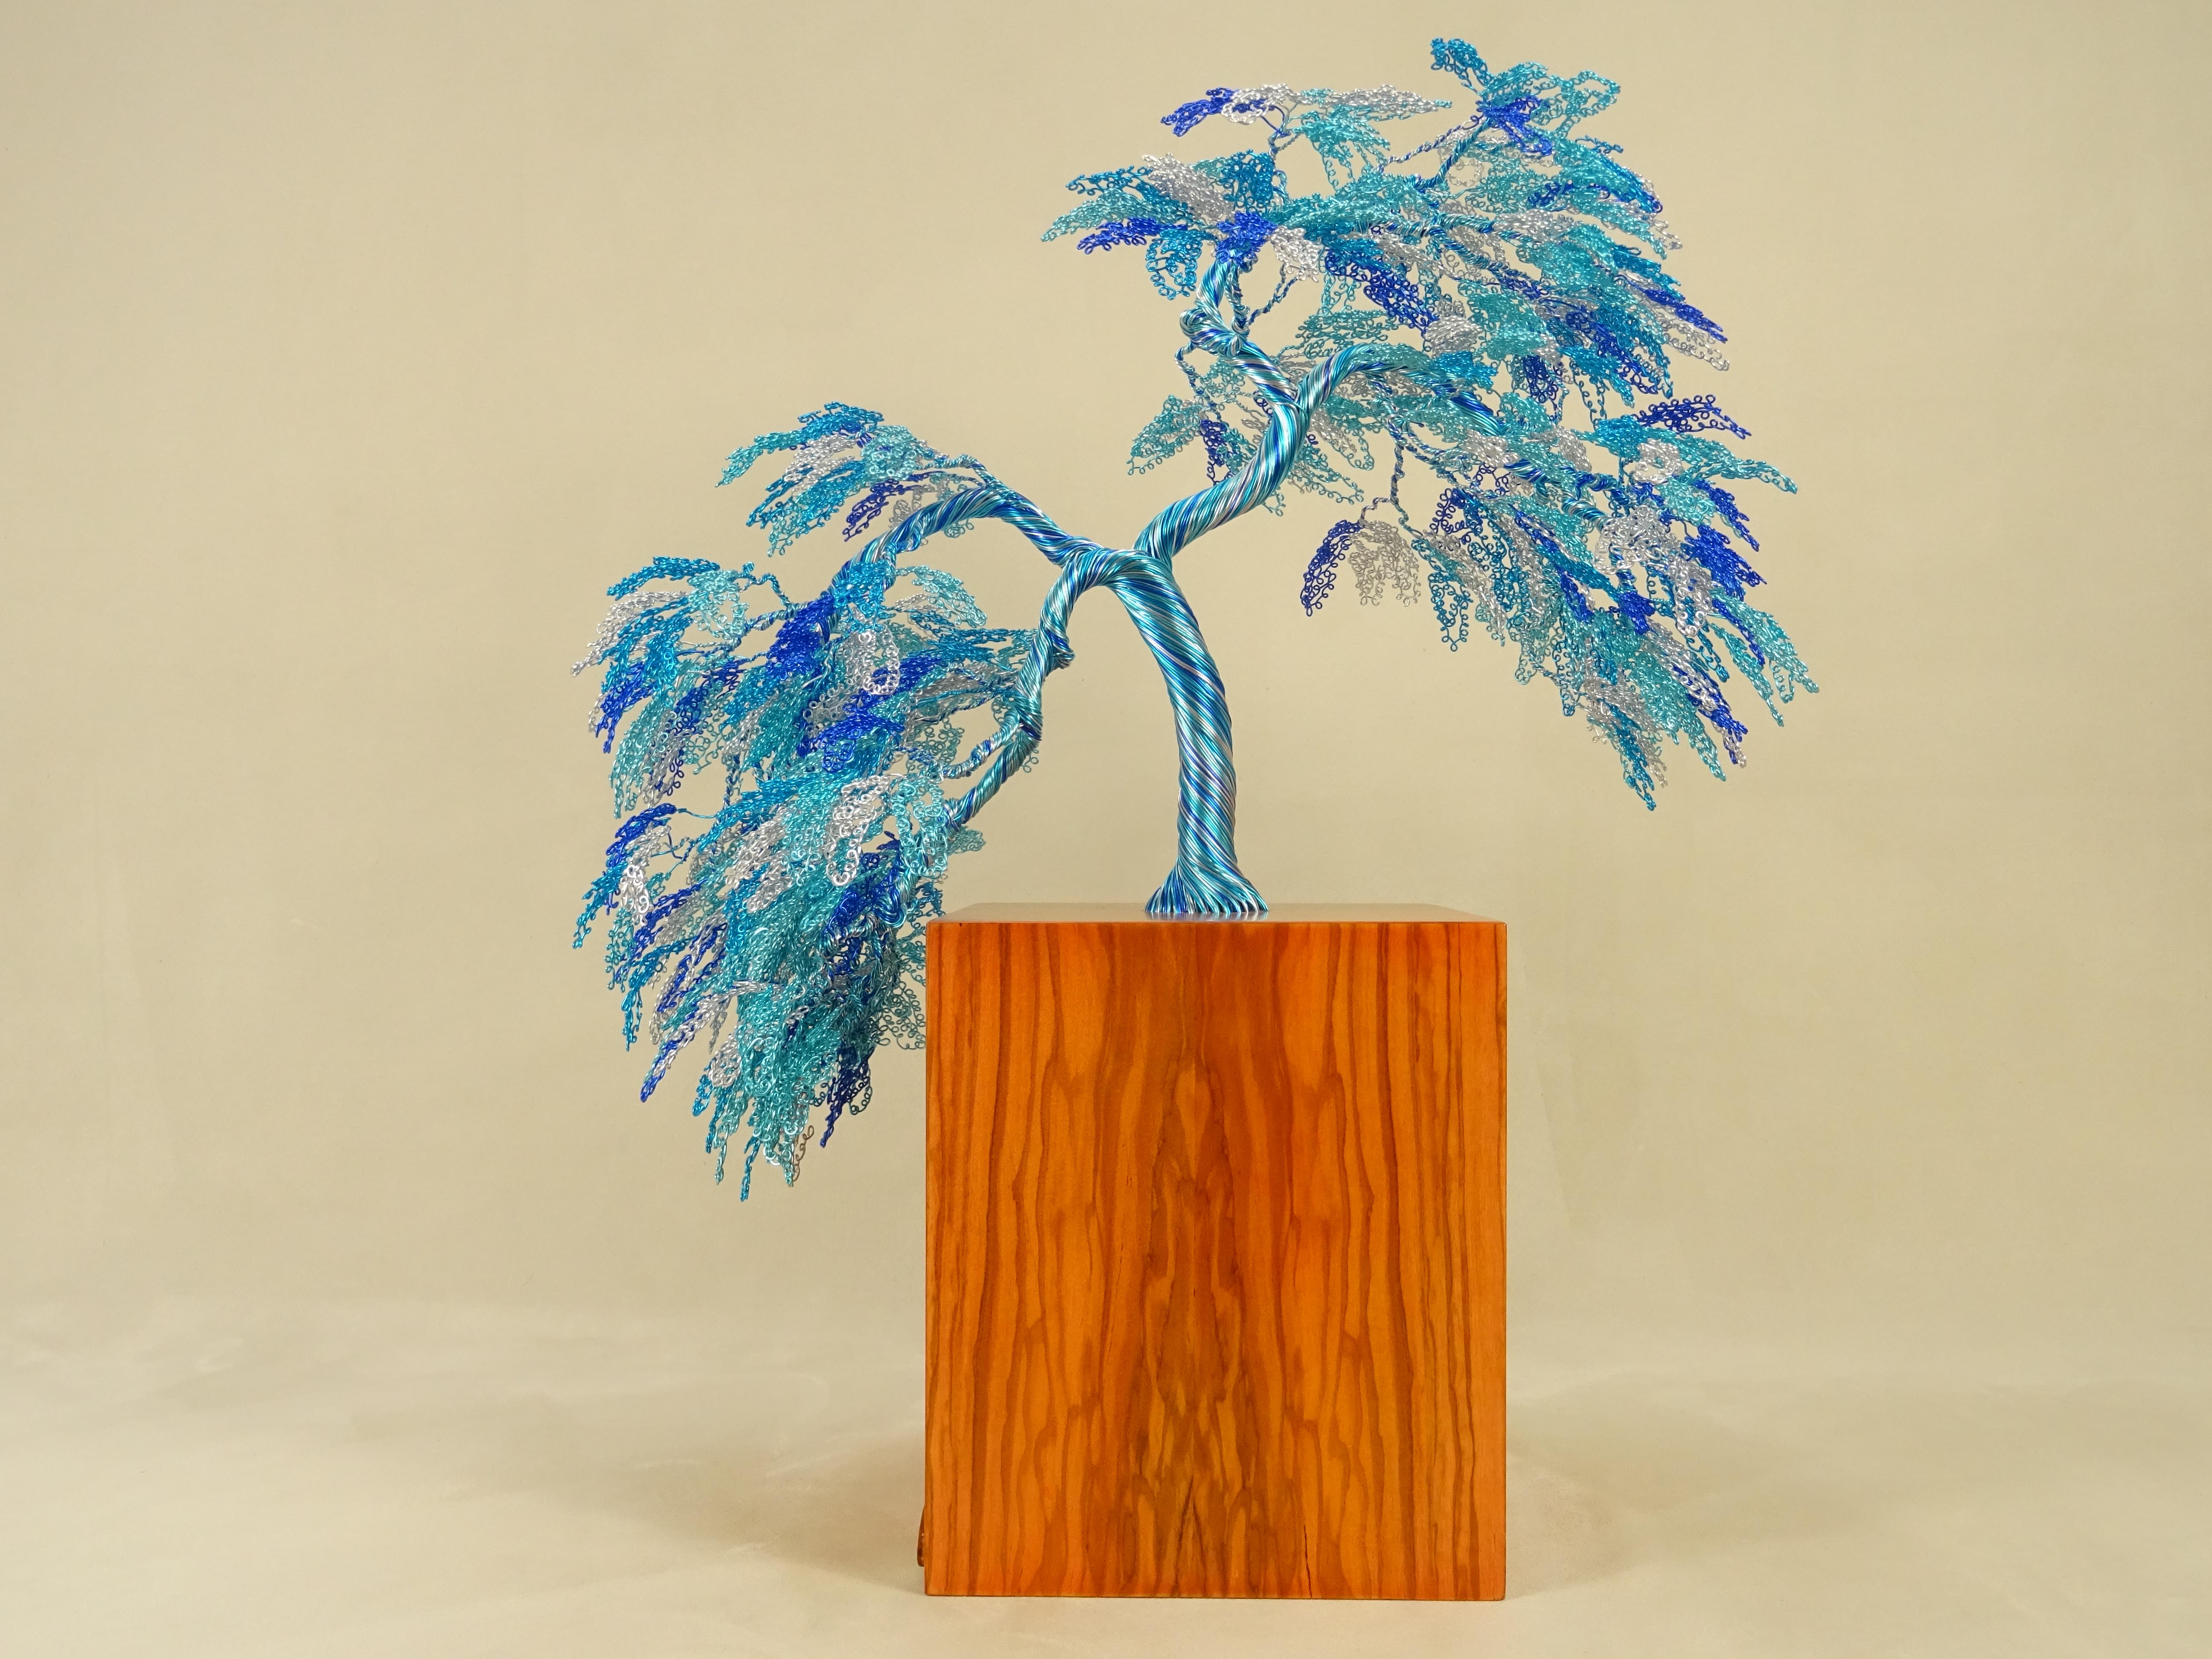 The Obeisance Bonsai is inspired by the beautiful Japanese trees and their flowering. 
The materials are wood and metals, representing both the strength of life and the roots of Mother Nature.
Sculptures are composed by wires that intertwine each